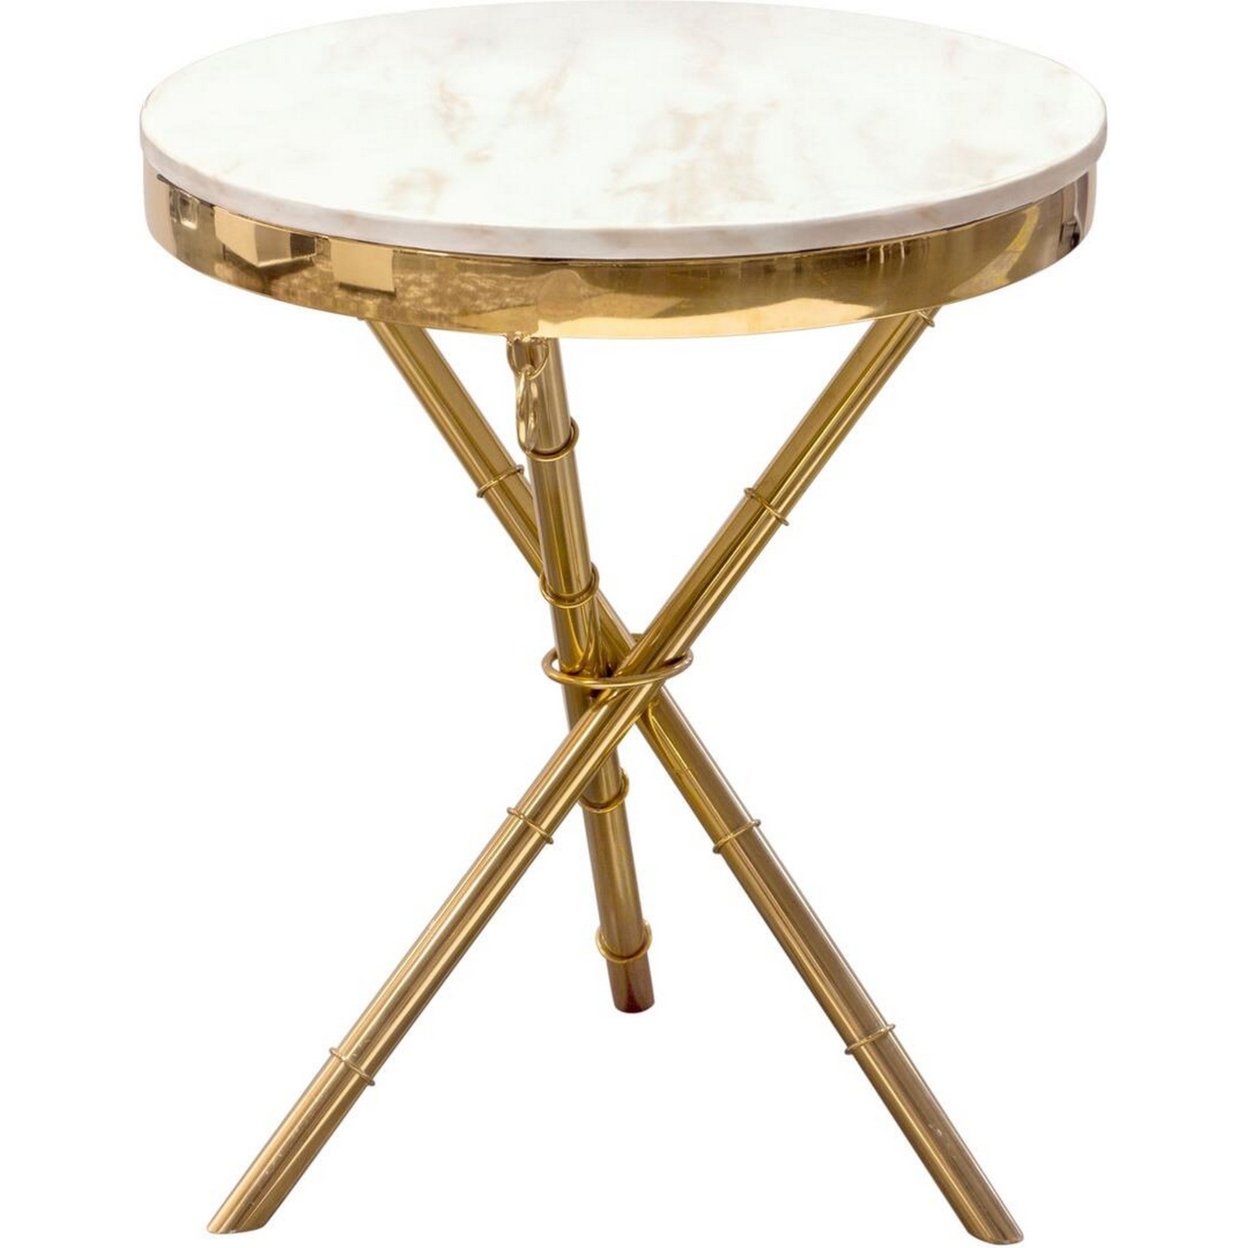 Marble Top Accent Table With Stainless Steel Crossed Legs, White And Gold- Saltoro Sherpi